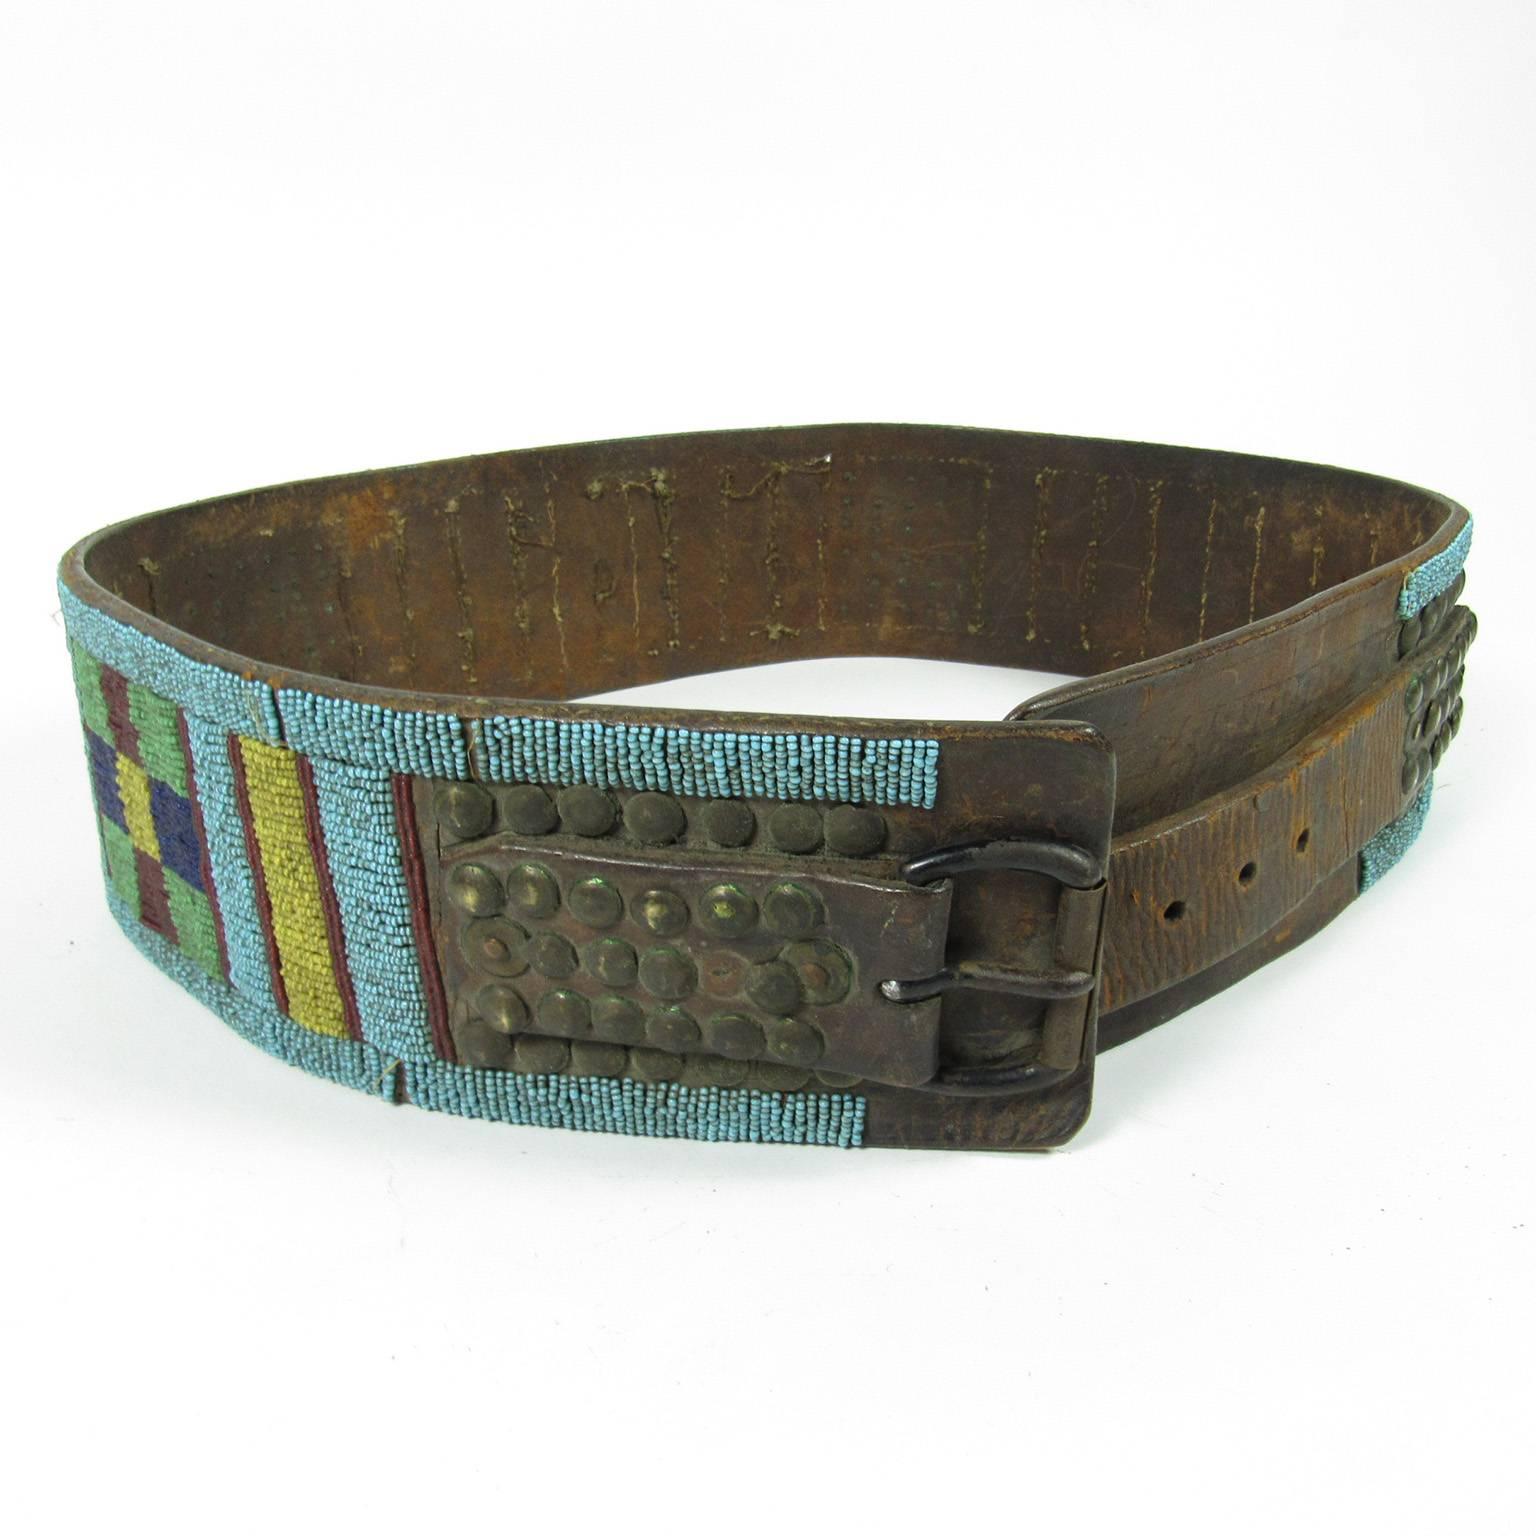 Fine mid-19th century native American colorful beaded and studded leather belt from the crow tribe. Featuring a ground of turquoise beads with yellow, green, pink, red and blue beads in a geometric design and brass studs. 
Measures: Length: 46 1/2